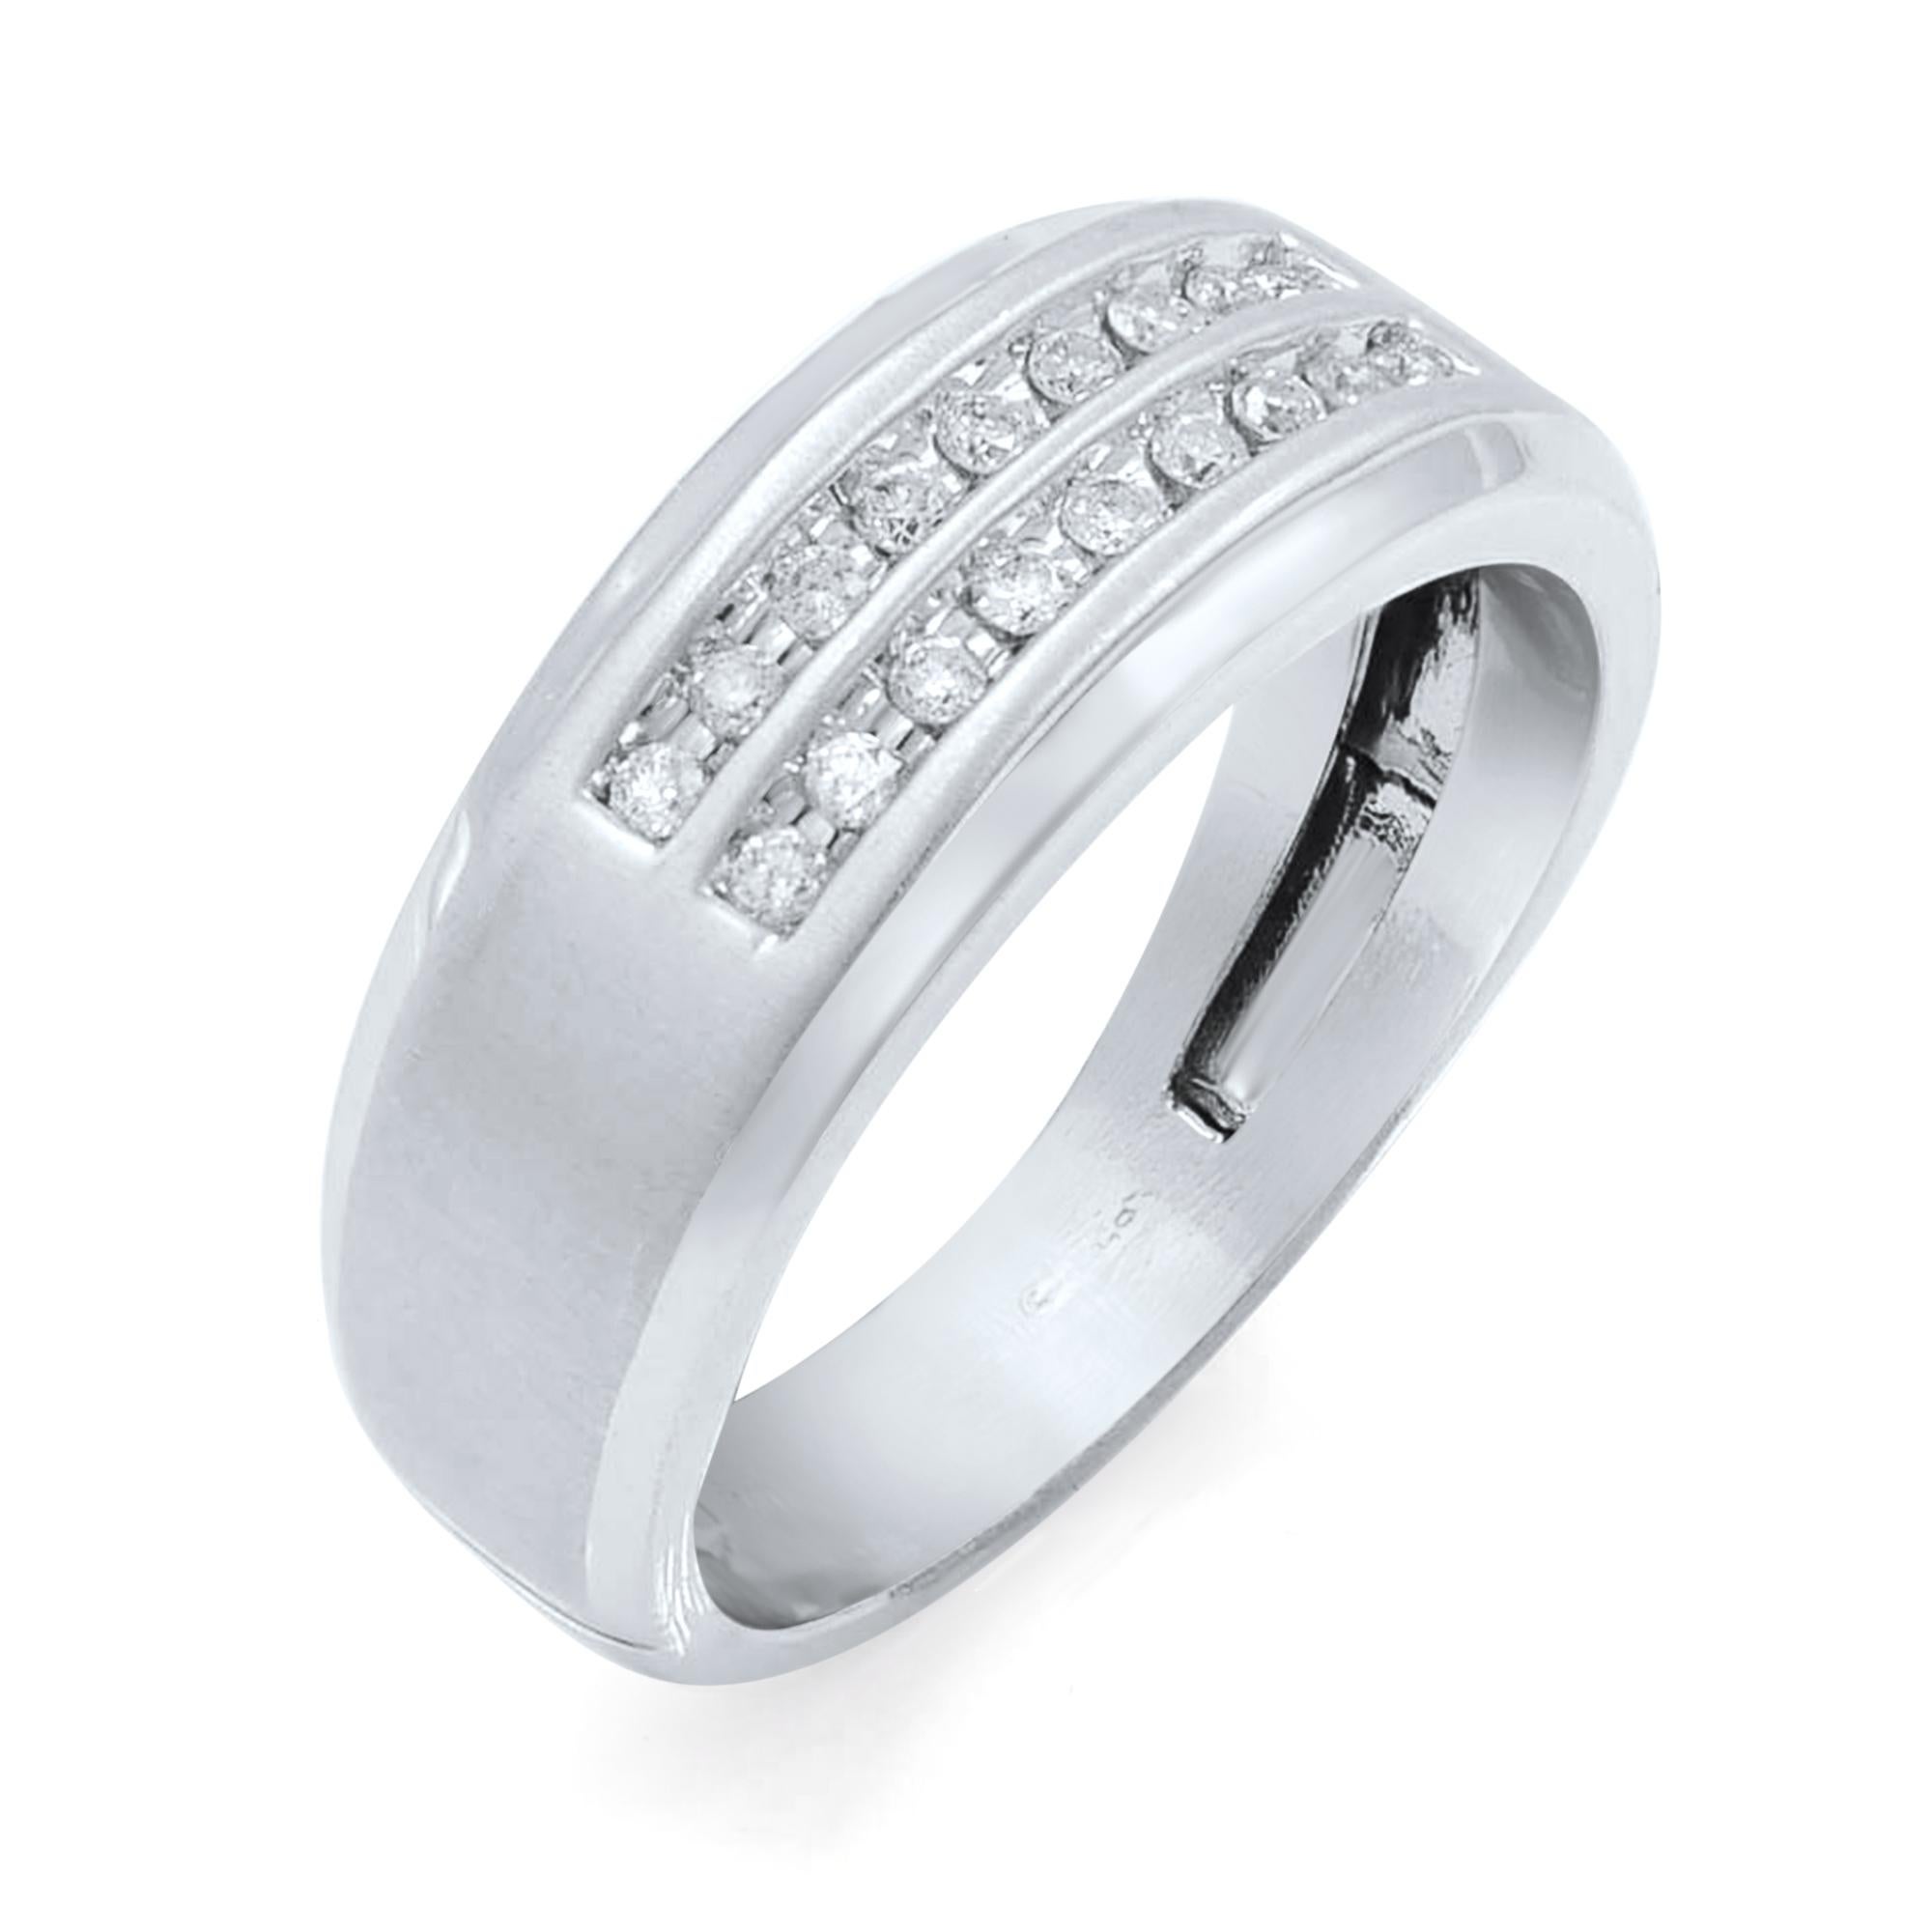 This is an authentic 10k white gold mens diamond wedding band ring. The Diamonds are channel set and are H-I Color and VS-SI clarity. The total diamond carat weight is 0.36. The Dimensions of the Ring is Mens: 10 (Can be resized). Top of the ring